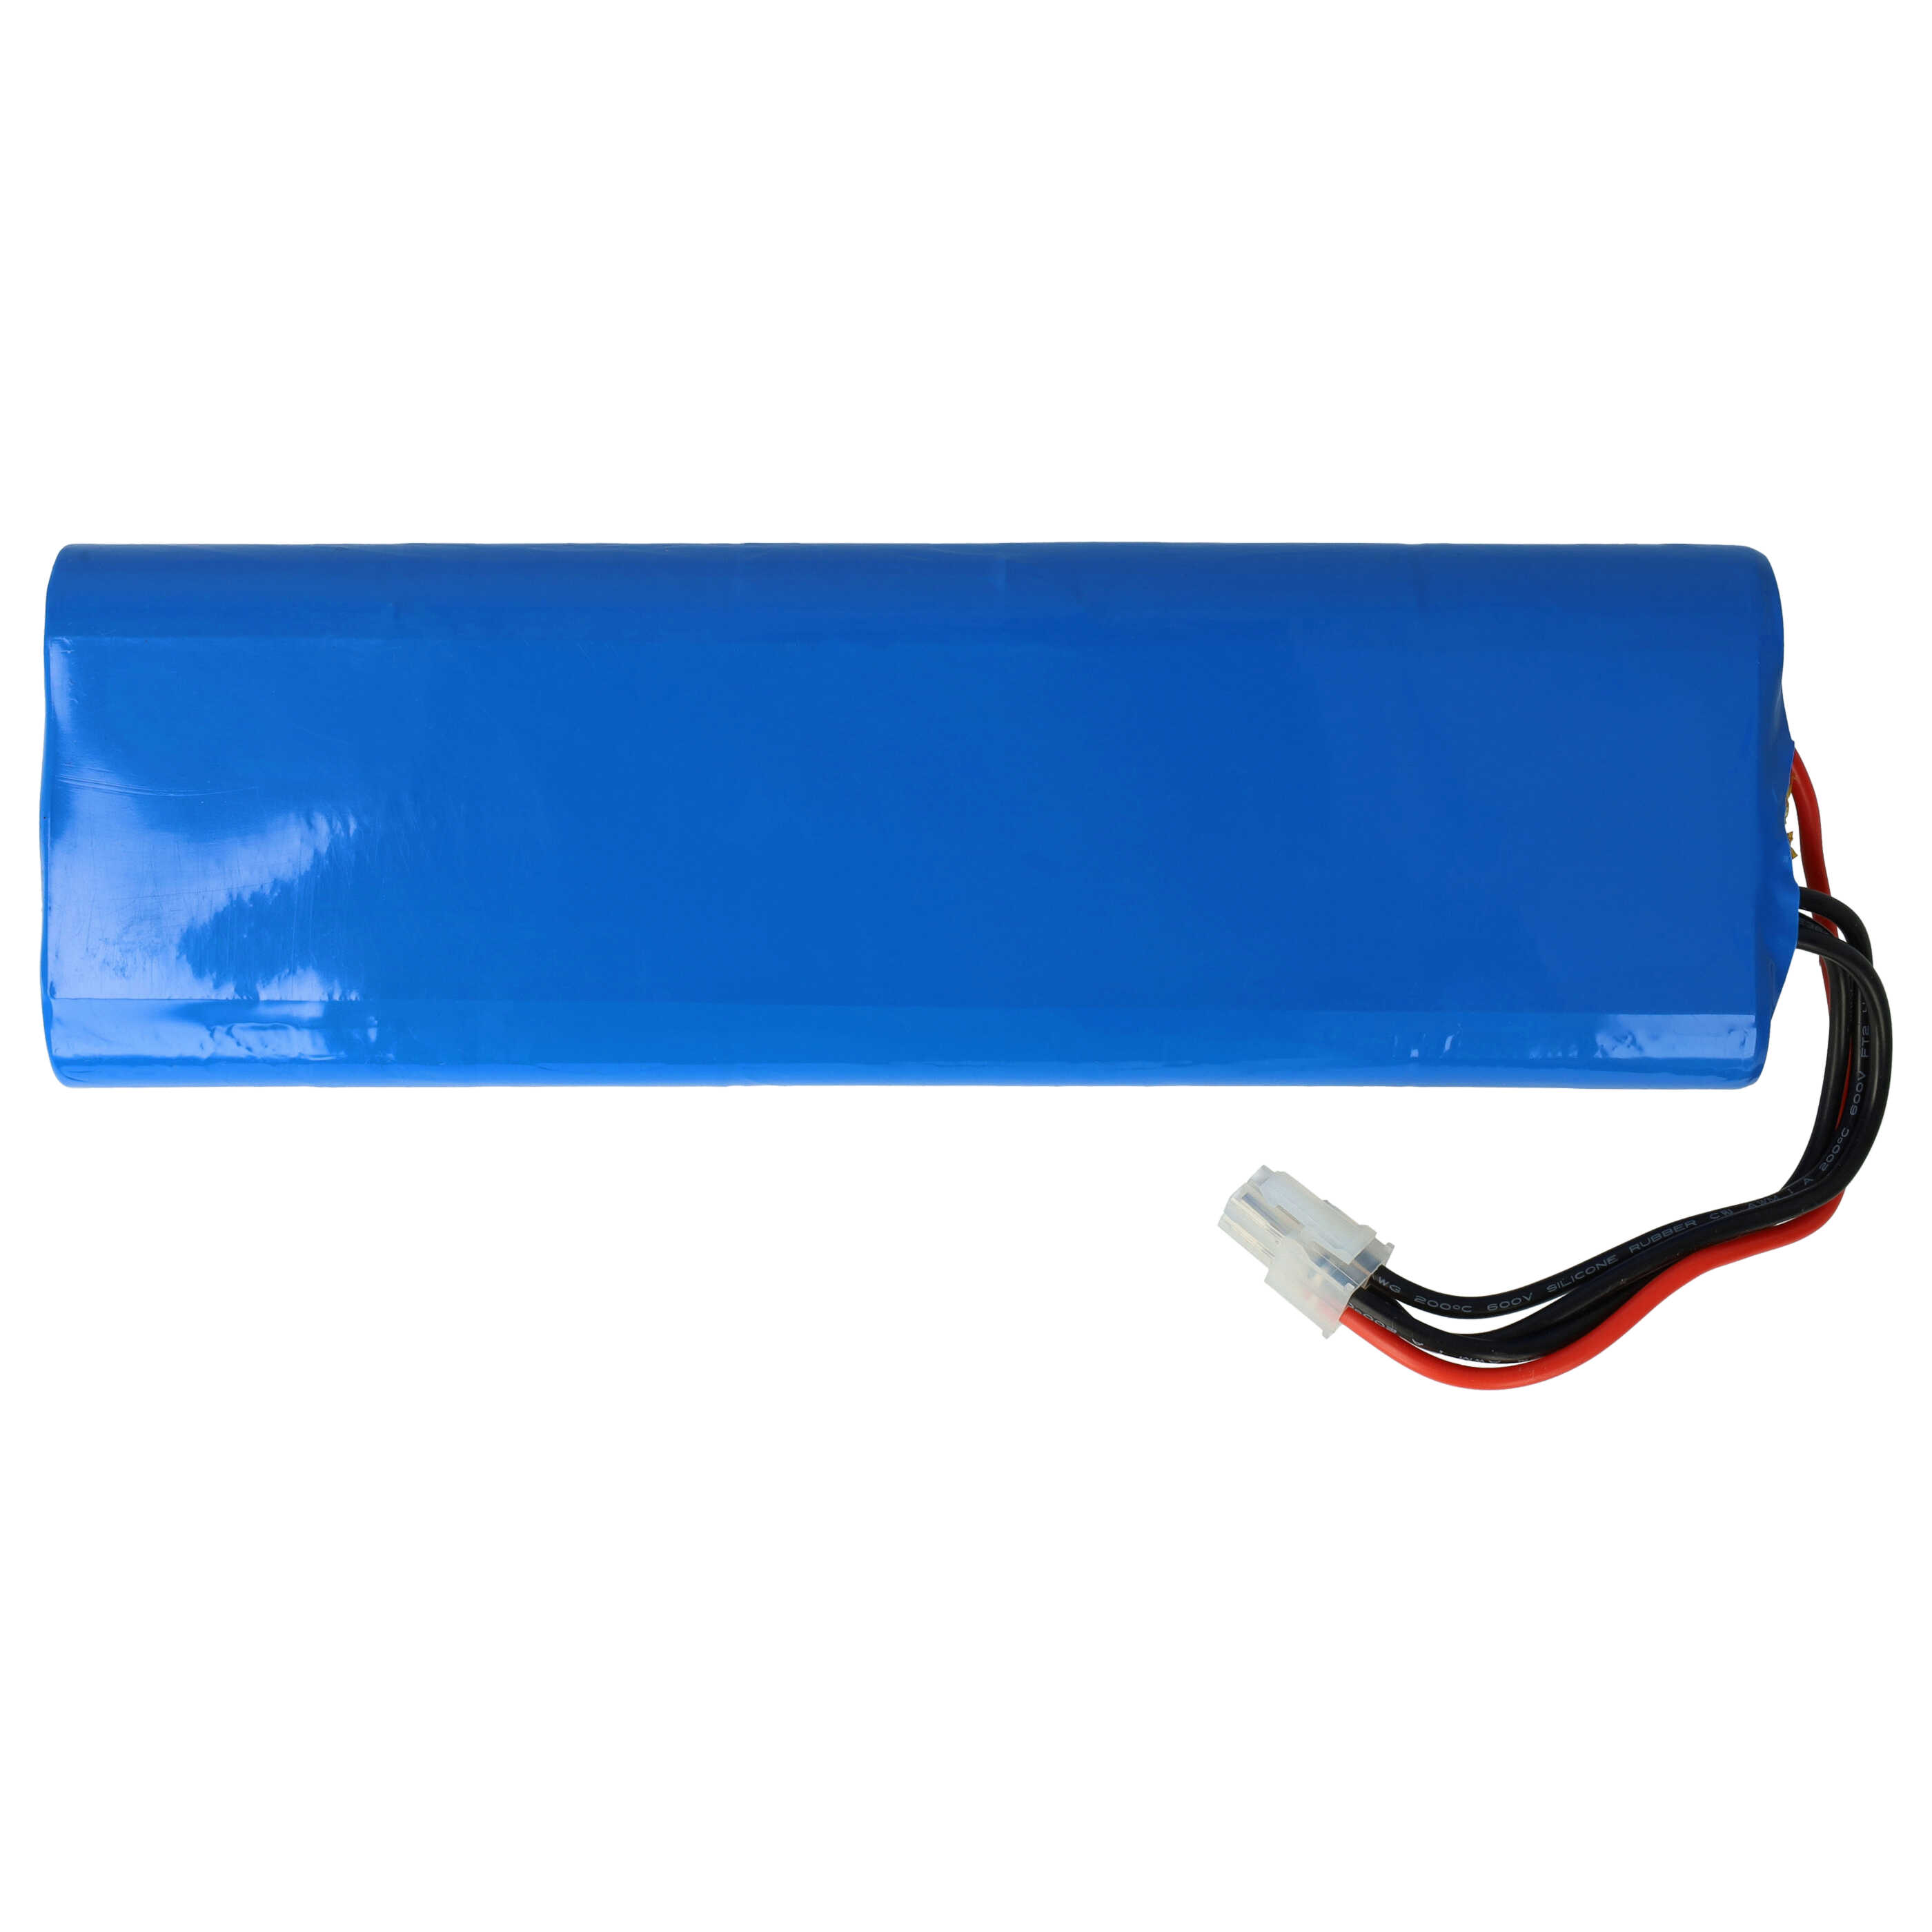 Lawnmower Battery (2 Units) Replacement for 112862101 - 2000mAh 18V NiMH